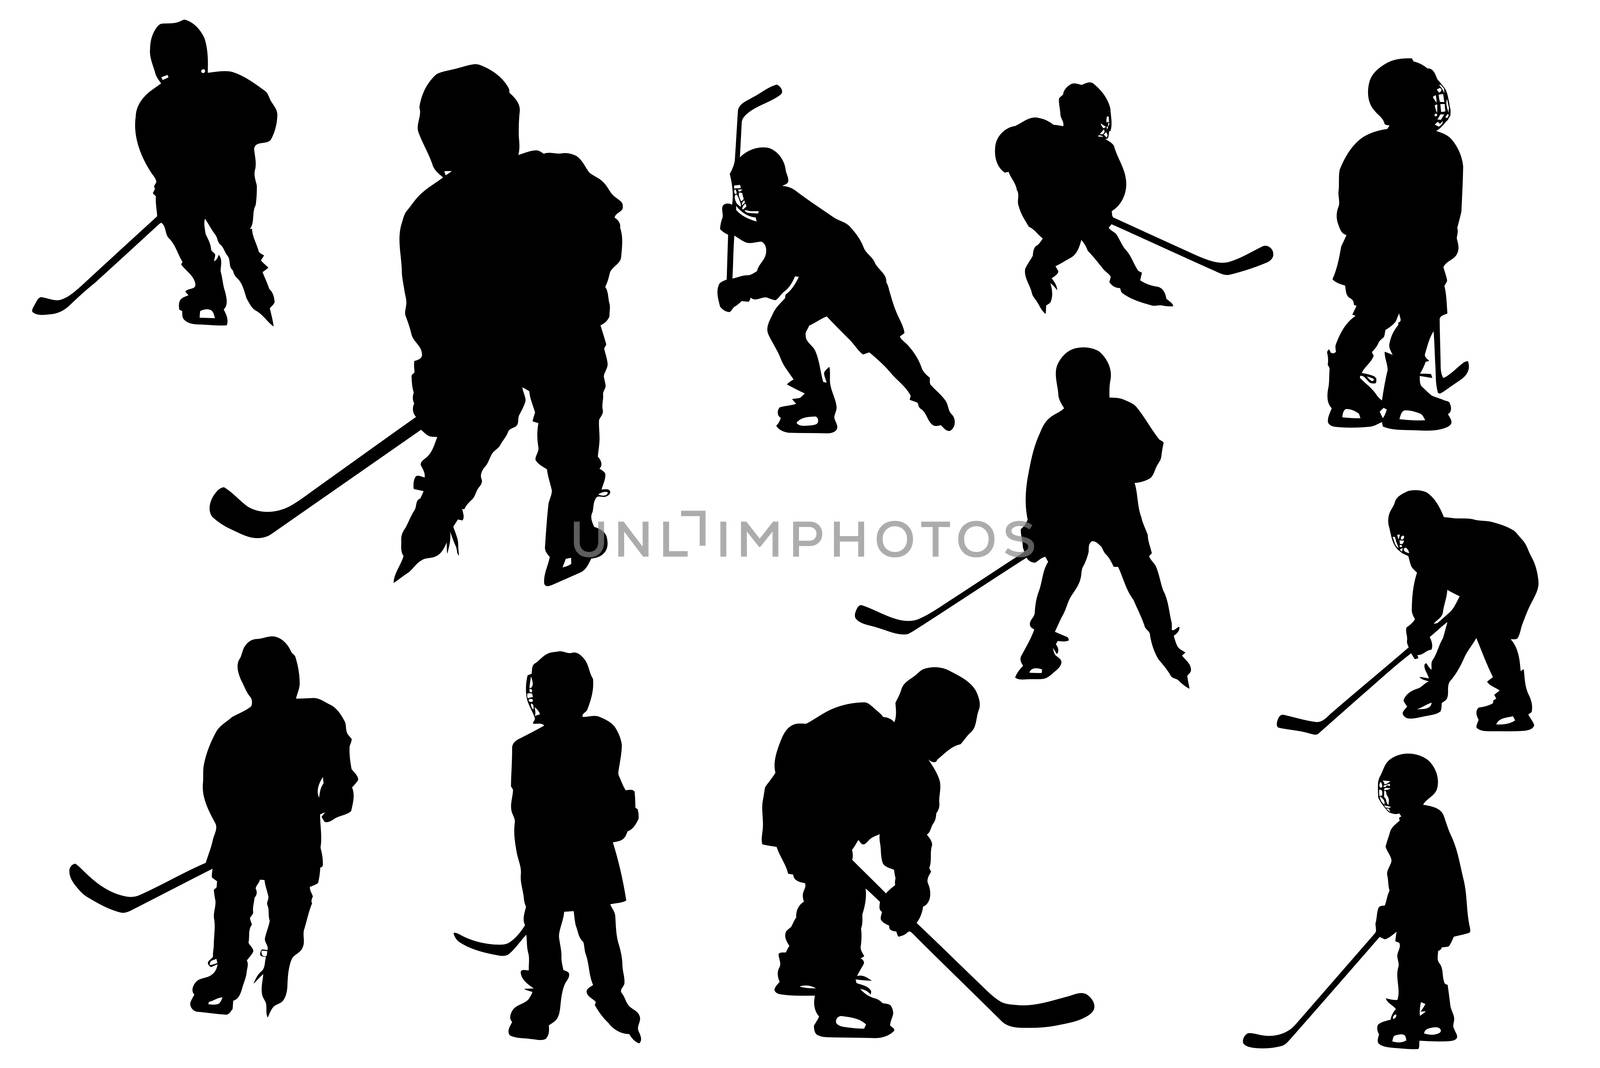 collage of silhouettes hockey players by zhannaprokopeva